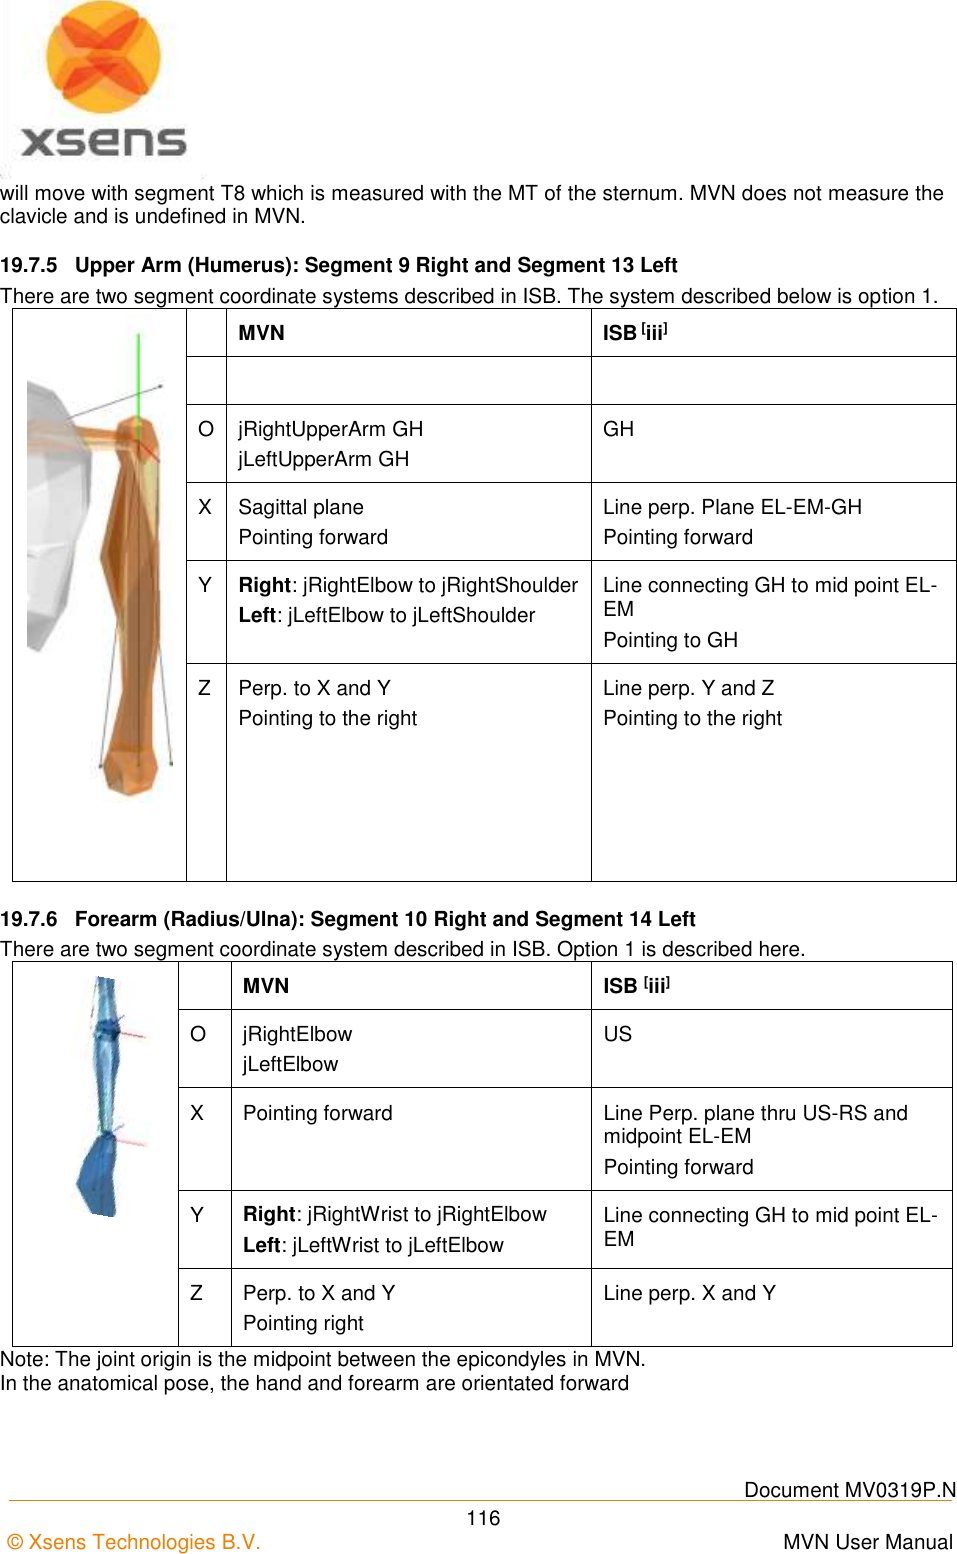    Document MV0319P.N © Xsens Technologies B.V.      MVN User Manual  116 will move with segment T8 which is measured with the MT of the sternum. MVN does not measure the clavicle and is undefined in MVN. 19.7.5  Upper Arm (Humerus): Segment 9 Right and Segment 13 Left There are two segment coordinate systems described in ISB. The system described below is option 1.   MVN  ISB [iii]    O jRightUpperArm GH jLeftUpperArm GH GH X Sagittal plane Pointing forward Line perp. Plane EL-EM-GH Pointing forward Y Right: jRightElbow to jRightShoulder Left: jLeftElbow to jLeftShoulder Line connecting GH to mid point EL-EM Pointing to GH Z Perp. to X and Y Pointing to the right Line perp. Y and Z Pointing to the right 19.7.6  Forearm (Radius/Ulna): Segment 10 Right and Segment 14 Left There are two segment coordinate system described in ISB. Option 1 is described here.    MVN  ISB [iii] O jRightElbow jLeftElbow US X Pointing forward Line Perp. plane thru US-RS and midpoint EL-EM Pointing forward Y Right: jRightWrist to jRightElbow Left: jLeftWrist to jLeftElbow Line connecting GH to mid point EL-EM Z Perp. to X and Y Pointing right Line perp. X and Y Note: The joint origin is the midpoint between the epicondyles in MVN. In the anatomical pose, the hand and forearm are orientated forward 